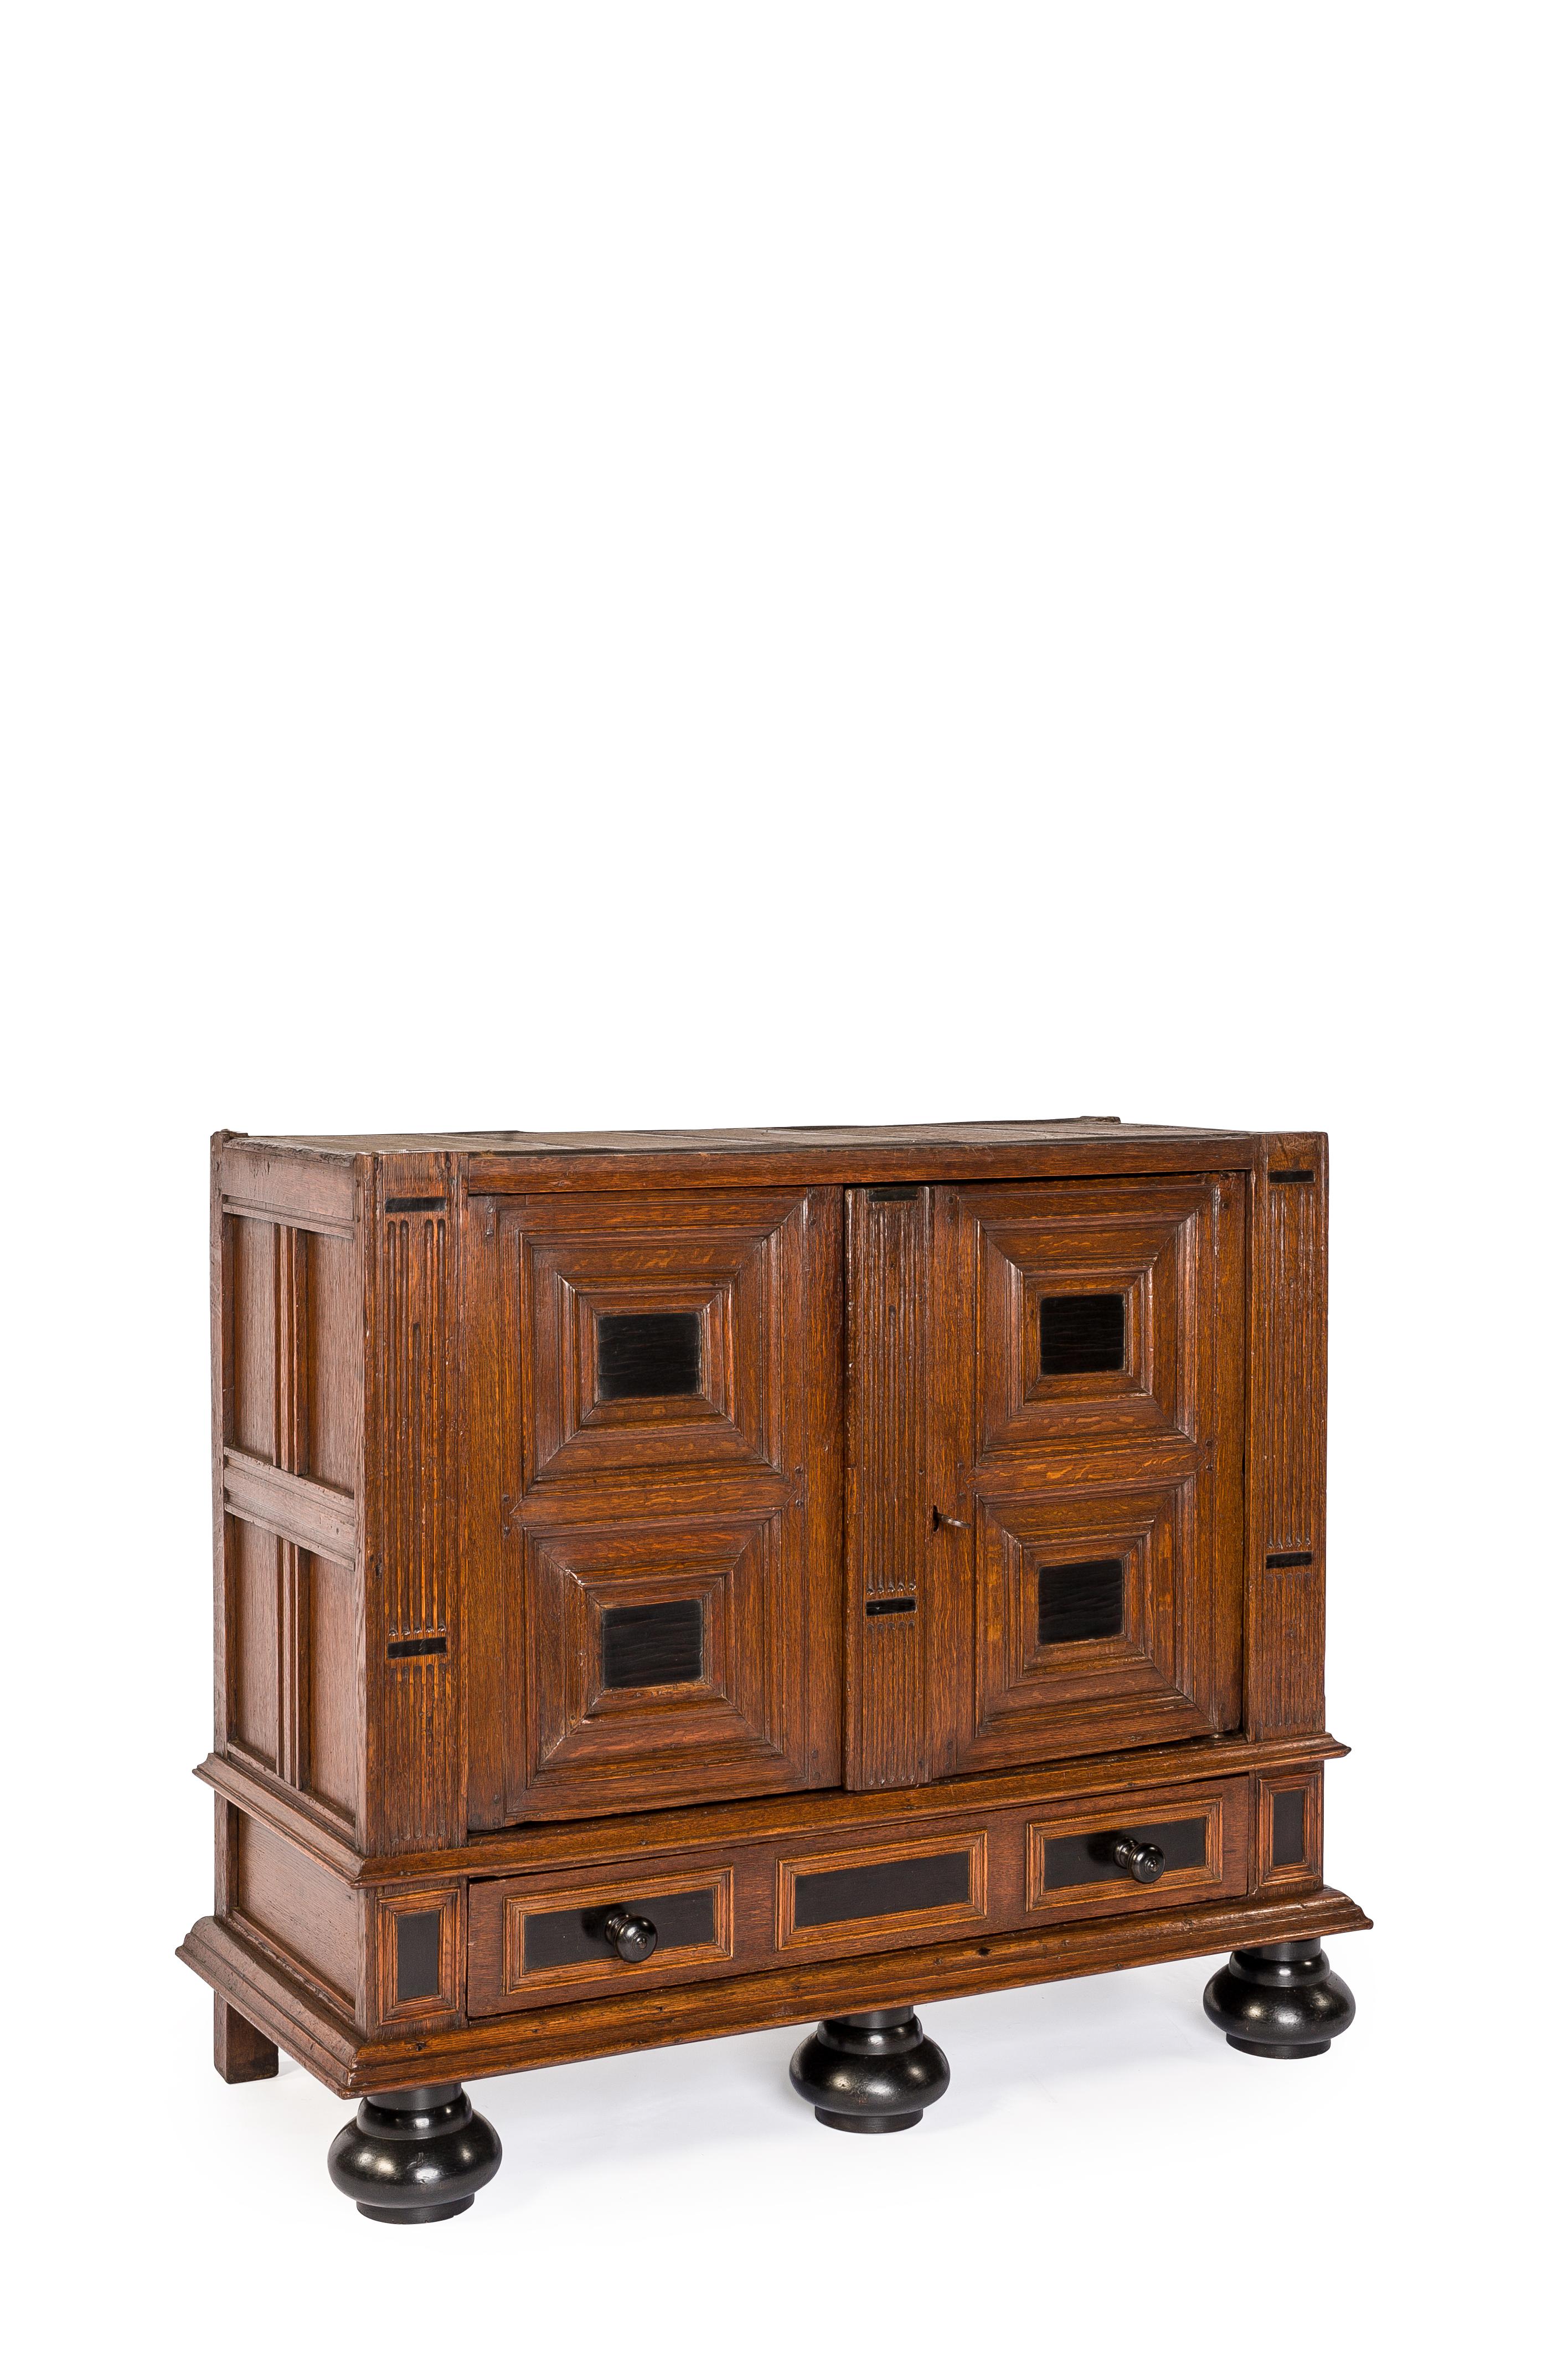 This extraordinary and friendly sized cupboard is made of the finest watered oak in the tradition of the Dutch Renaissance during the “Dutch golden age” It is a two-story four-door cabinet with one drawer over large ebonized bun feet. This cabinet